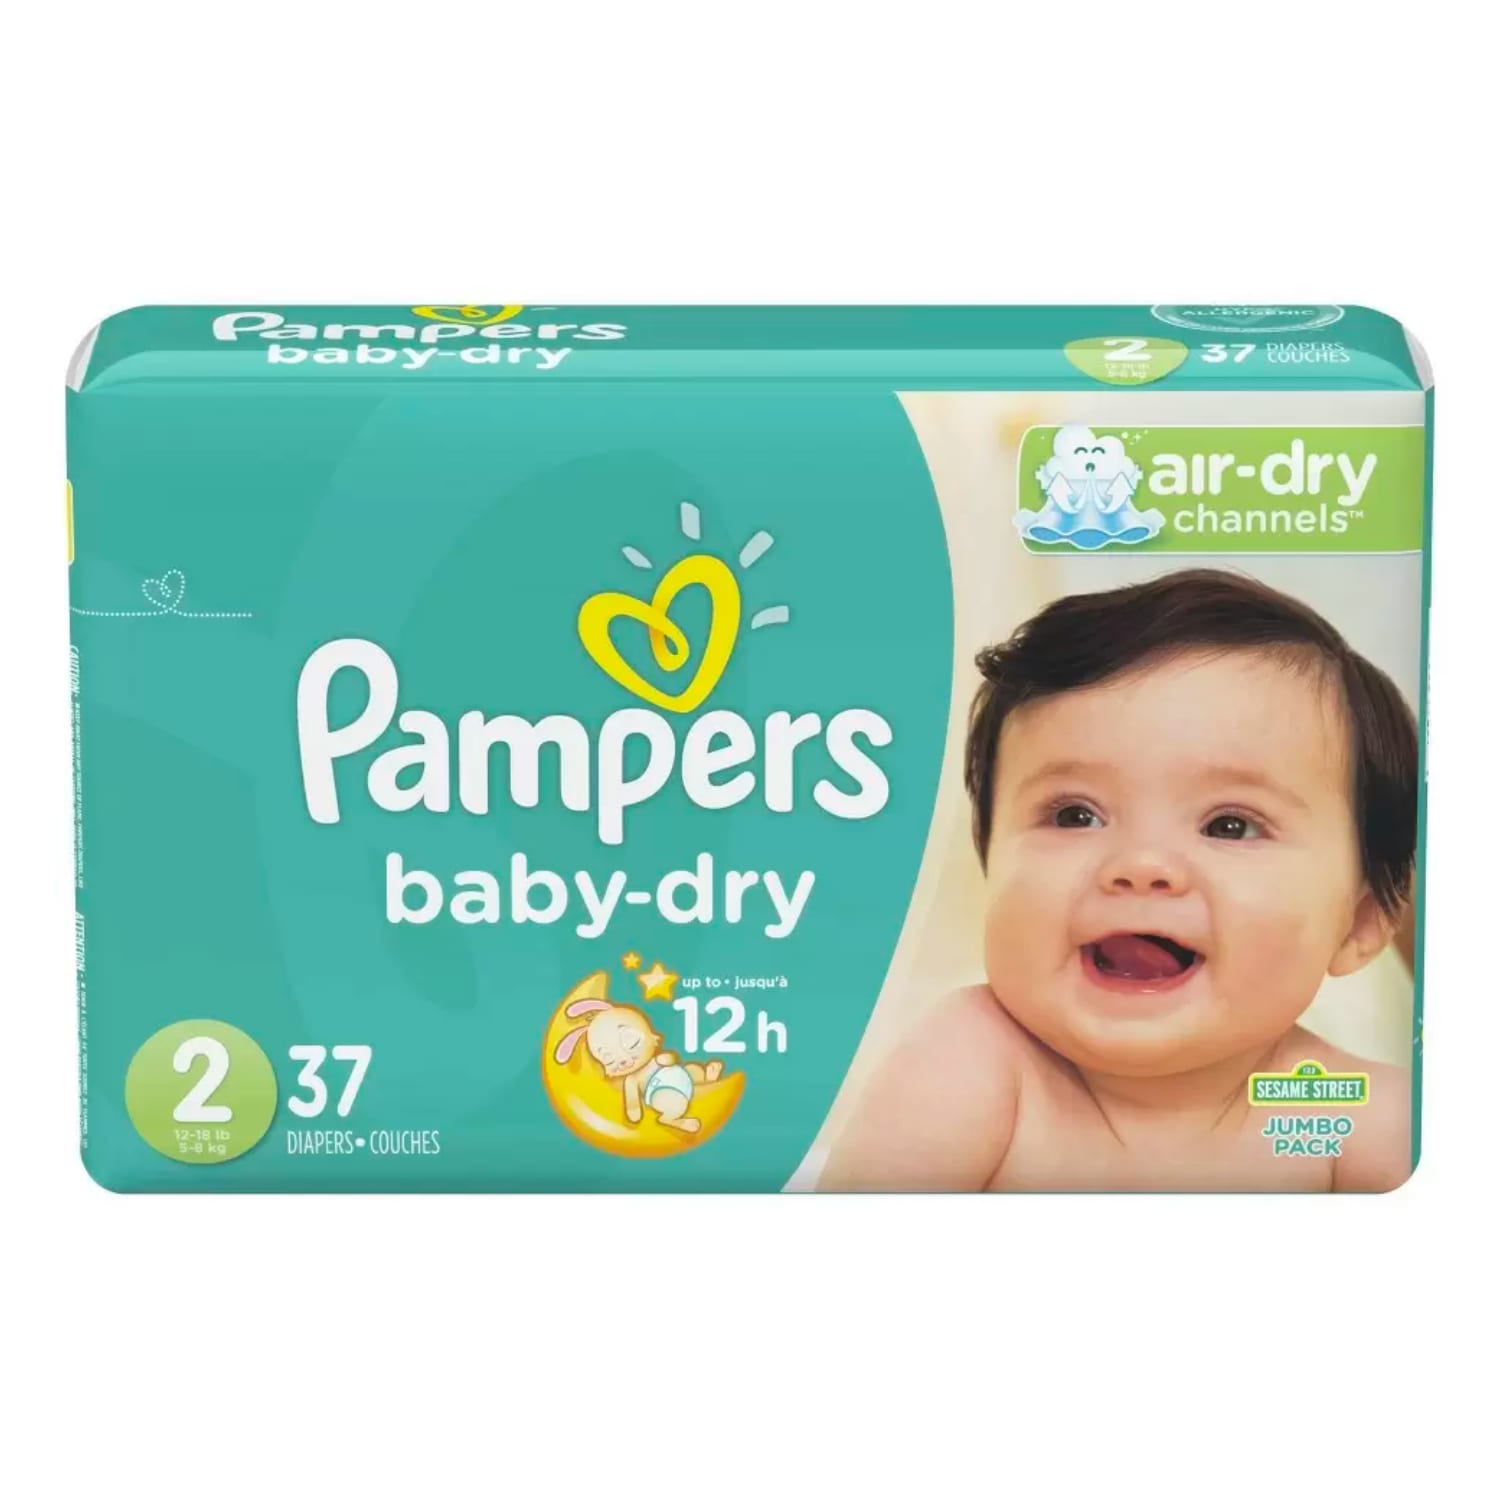 Pampers Baby-Dry Diapers Jumbo Pack (Size 2, 37 Count) - MedaKi